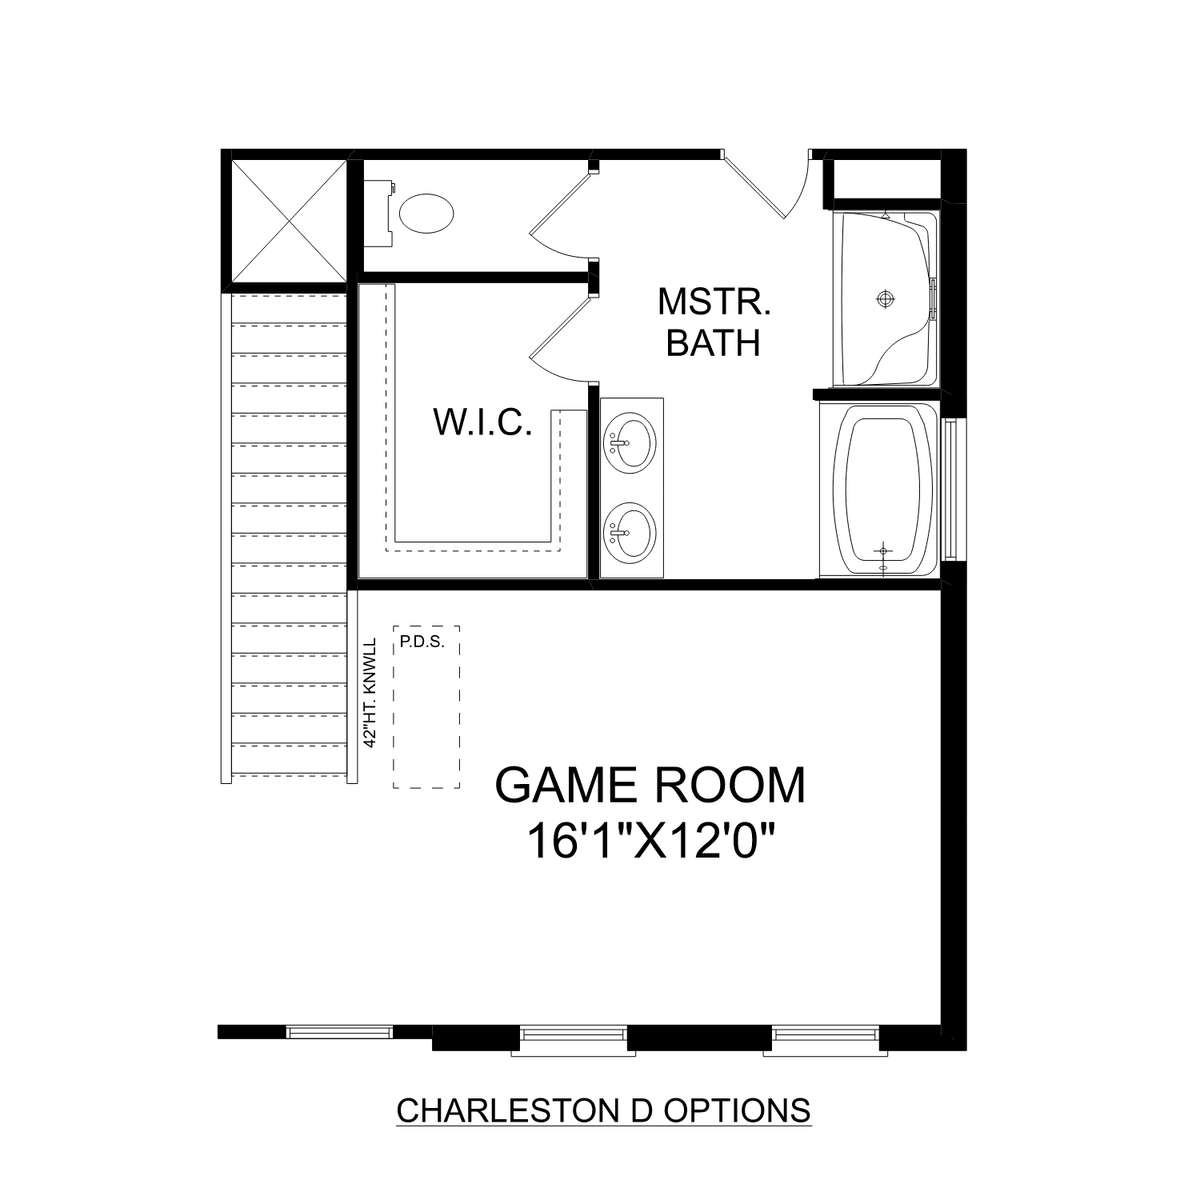 3 - The Charleston D buildable floor plan layout in Davidson Homes' Creekside community.